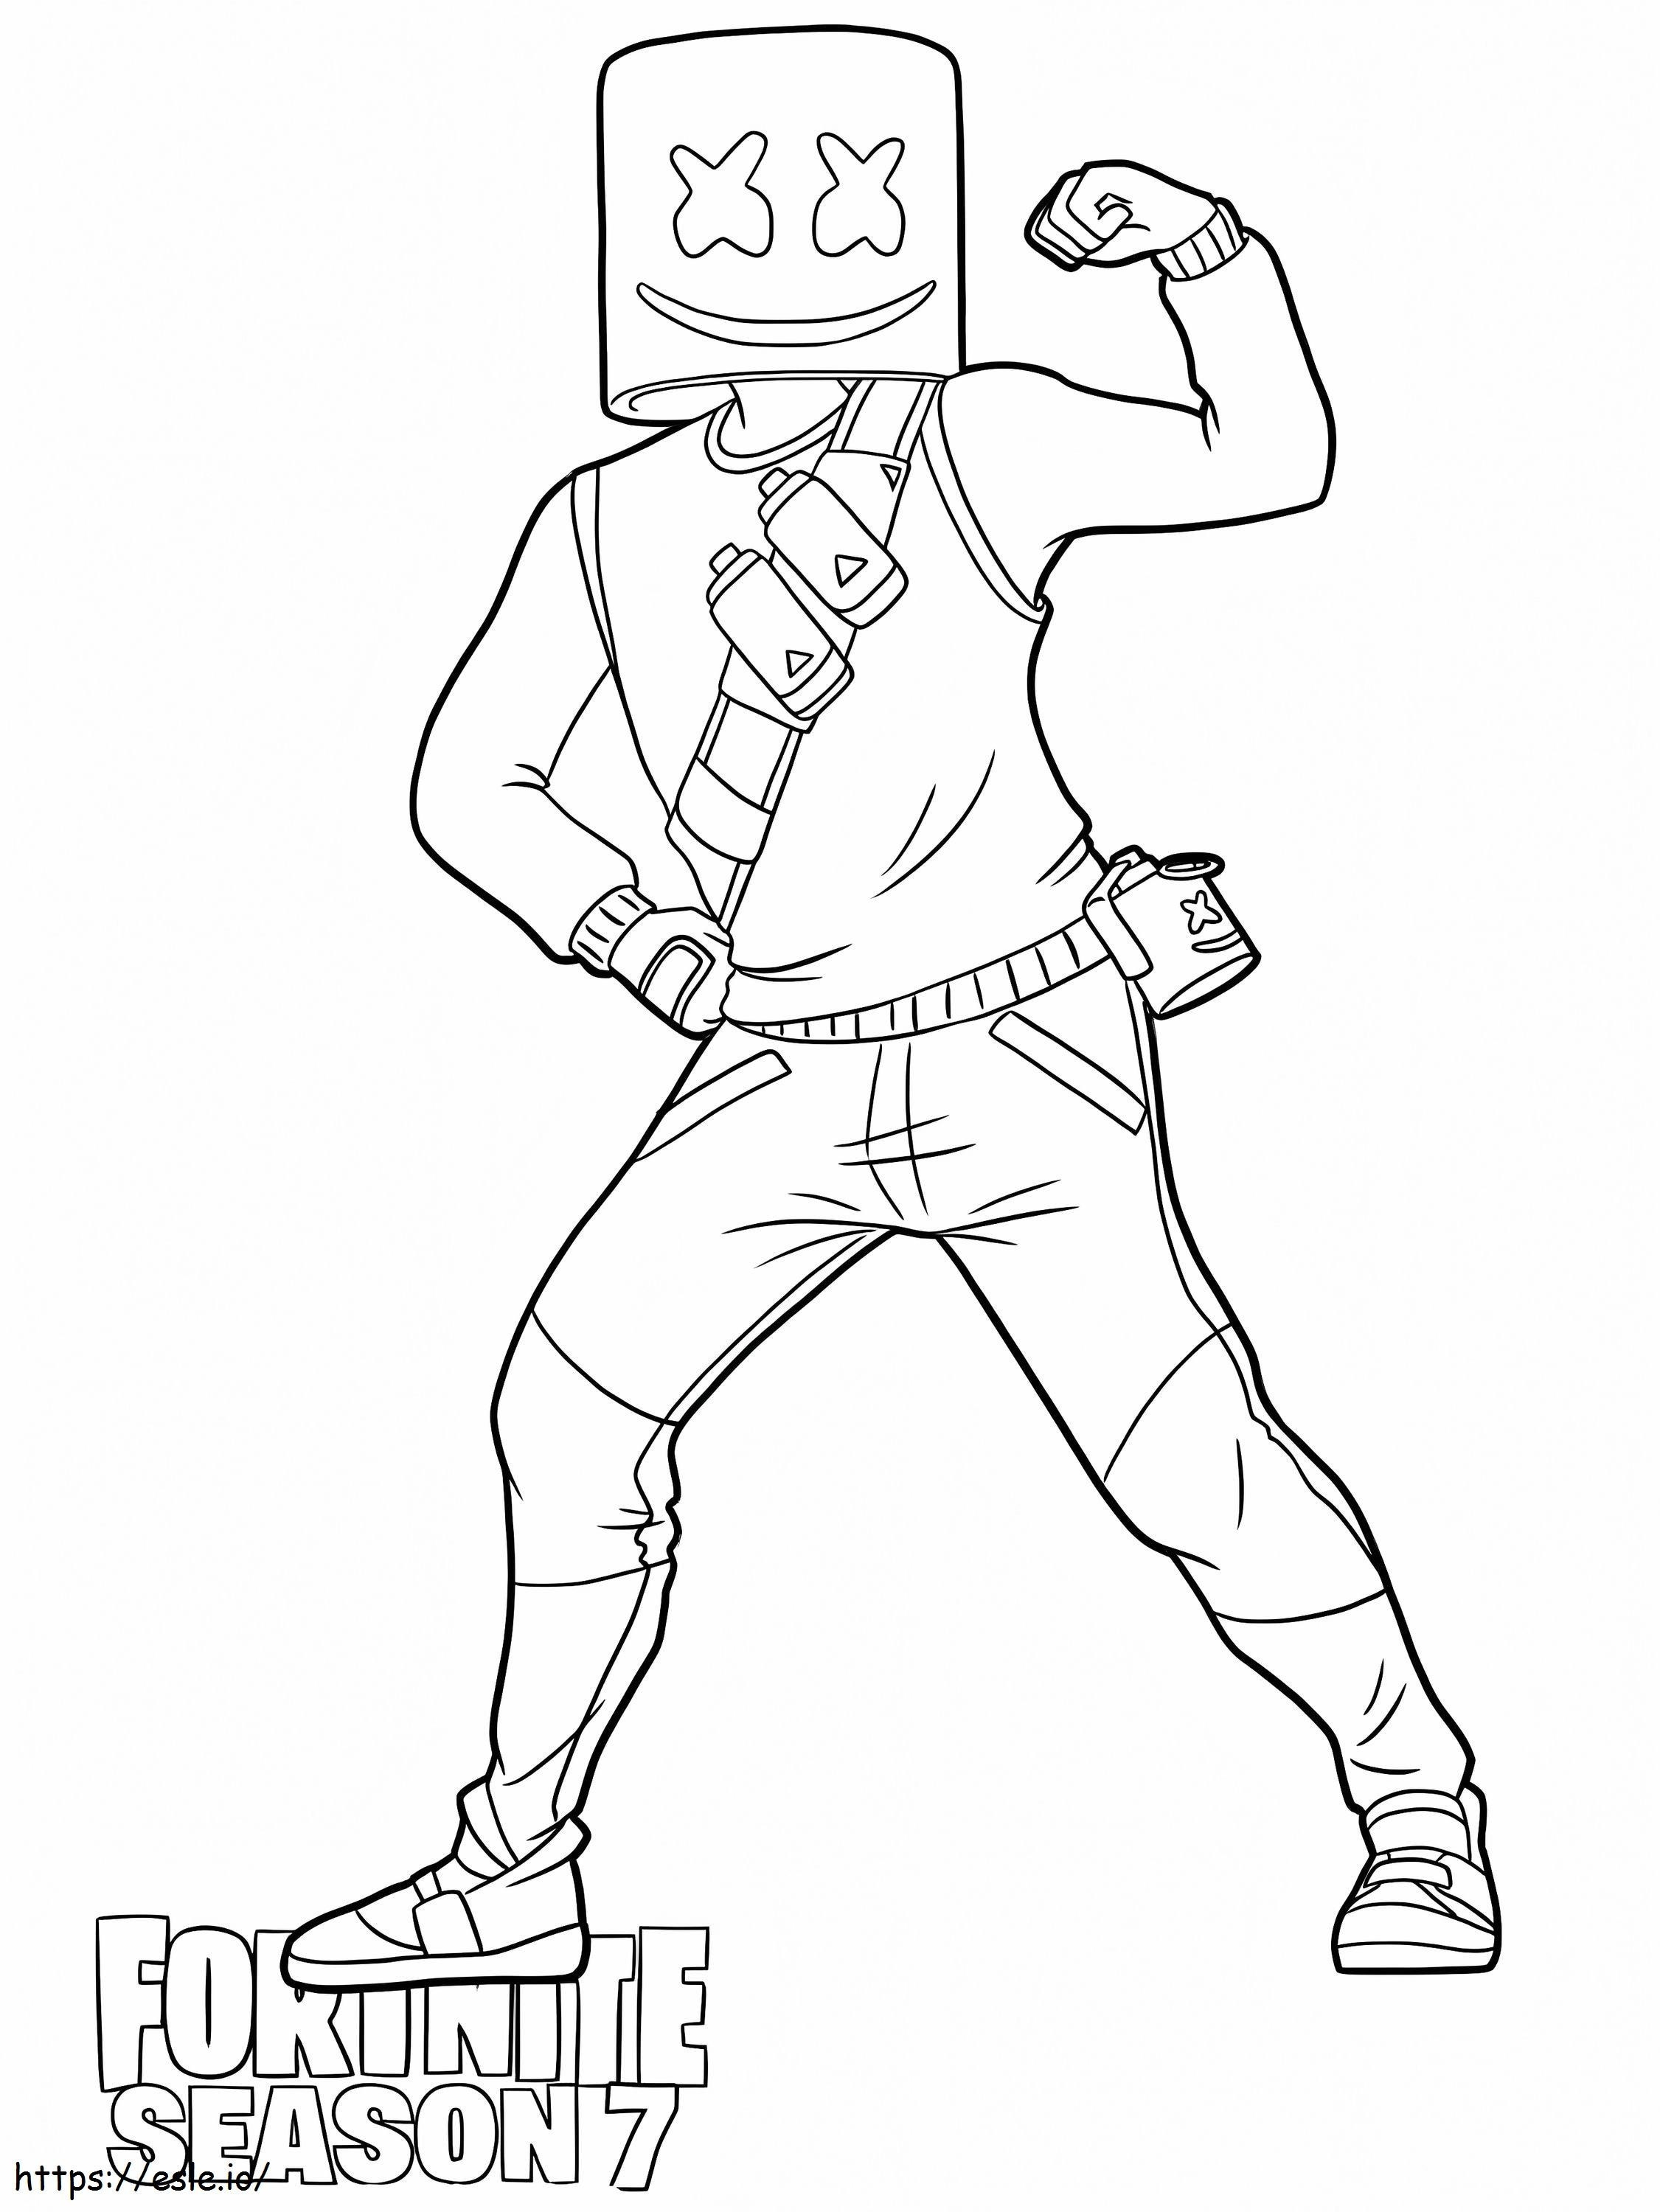 Marshmello 4 coloring page